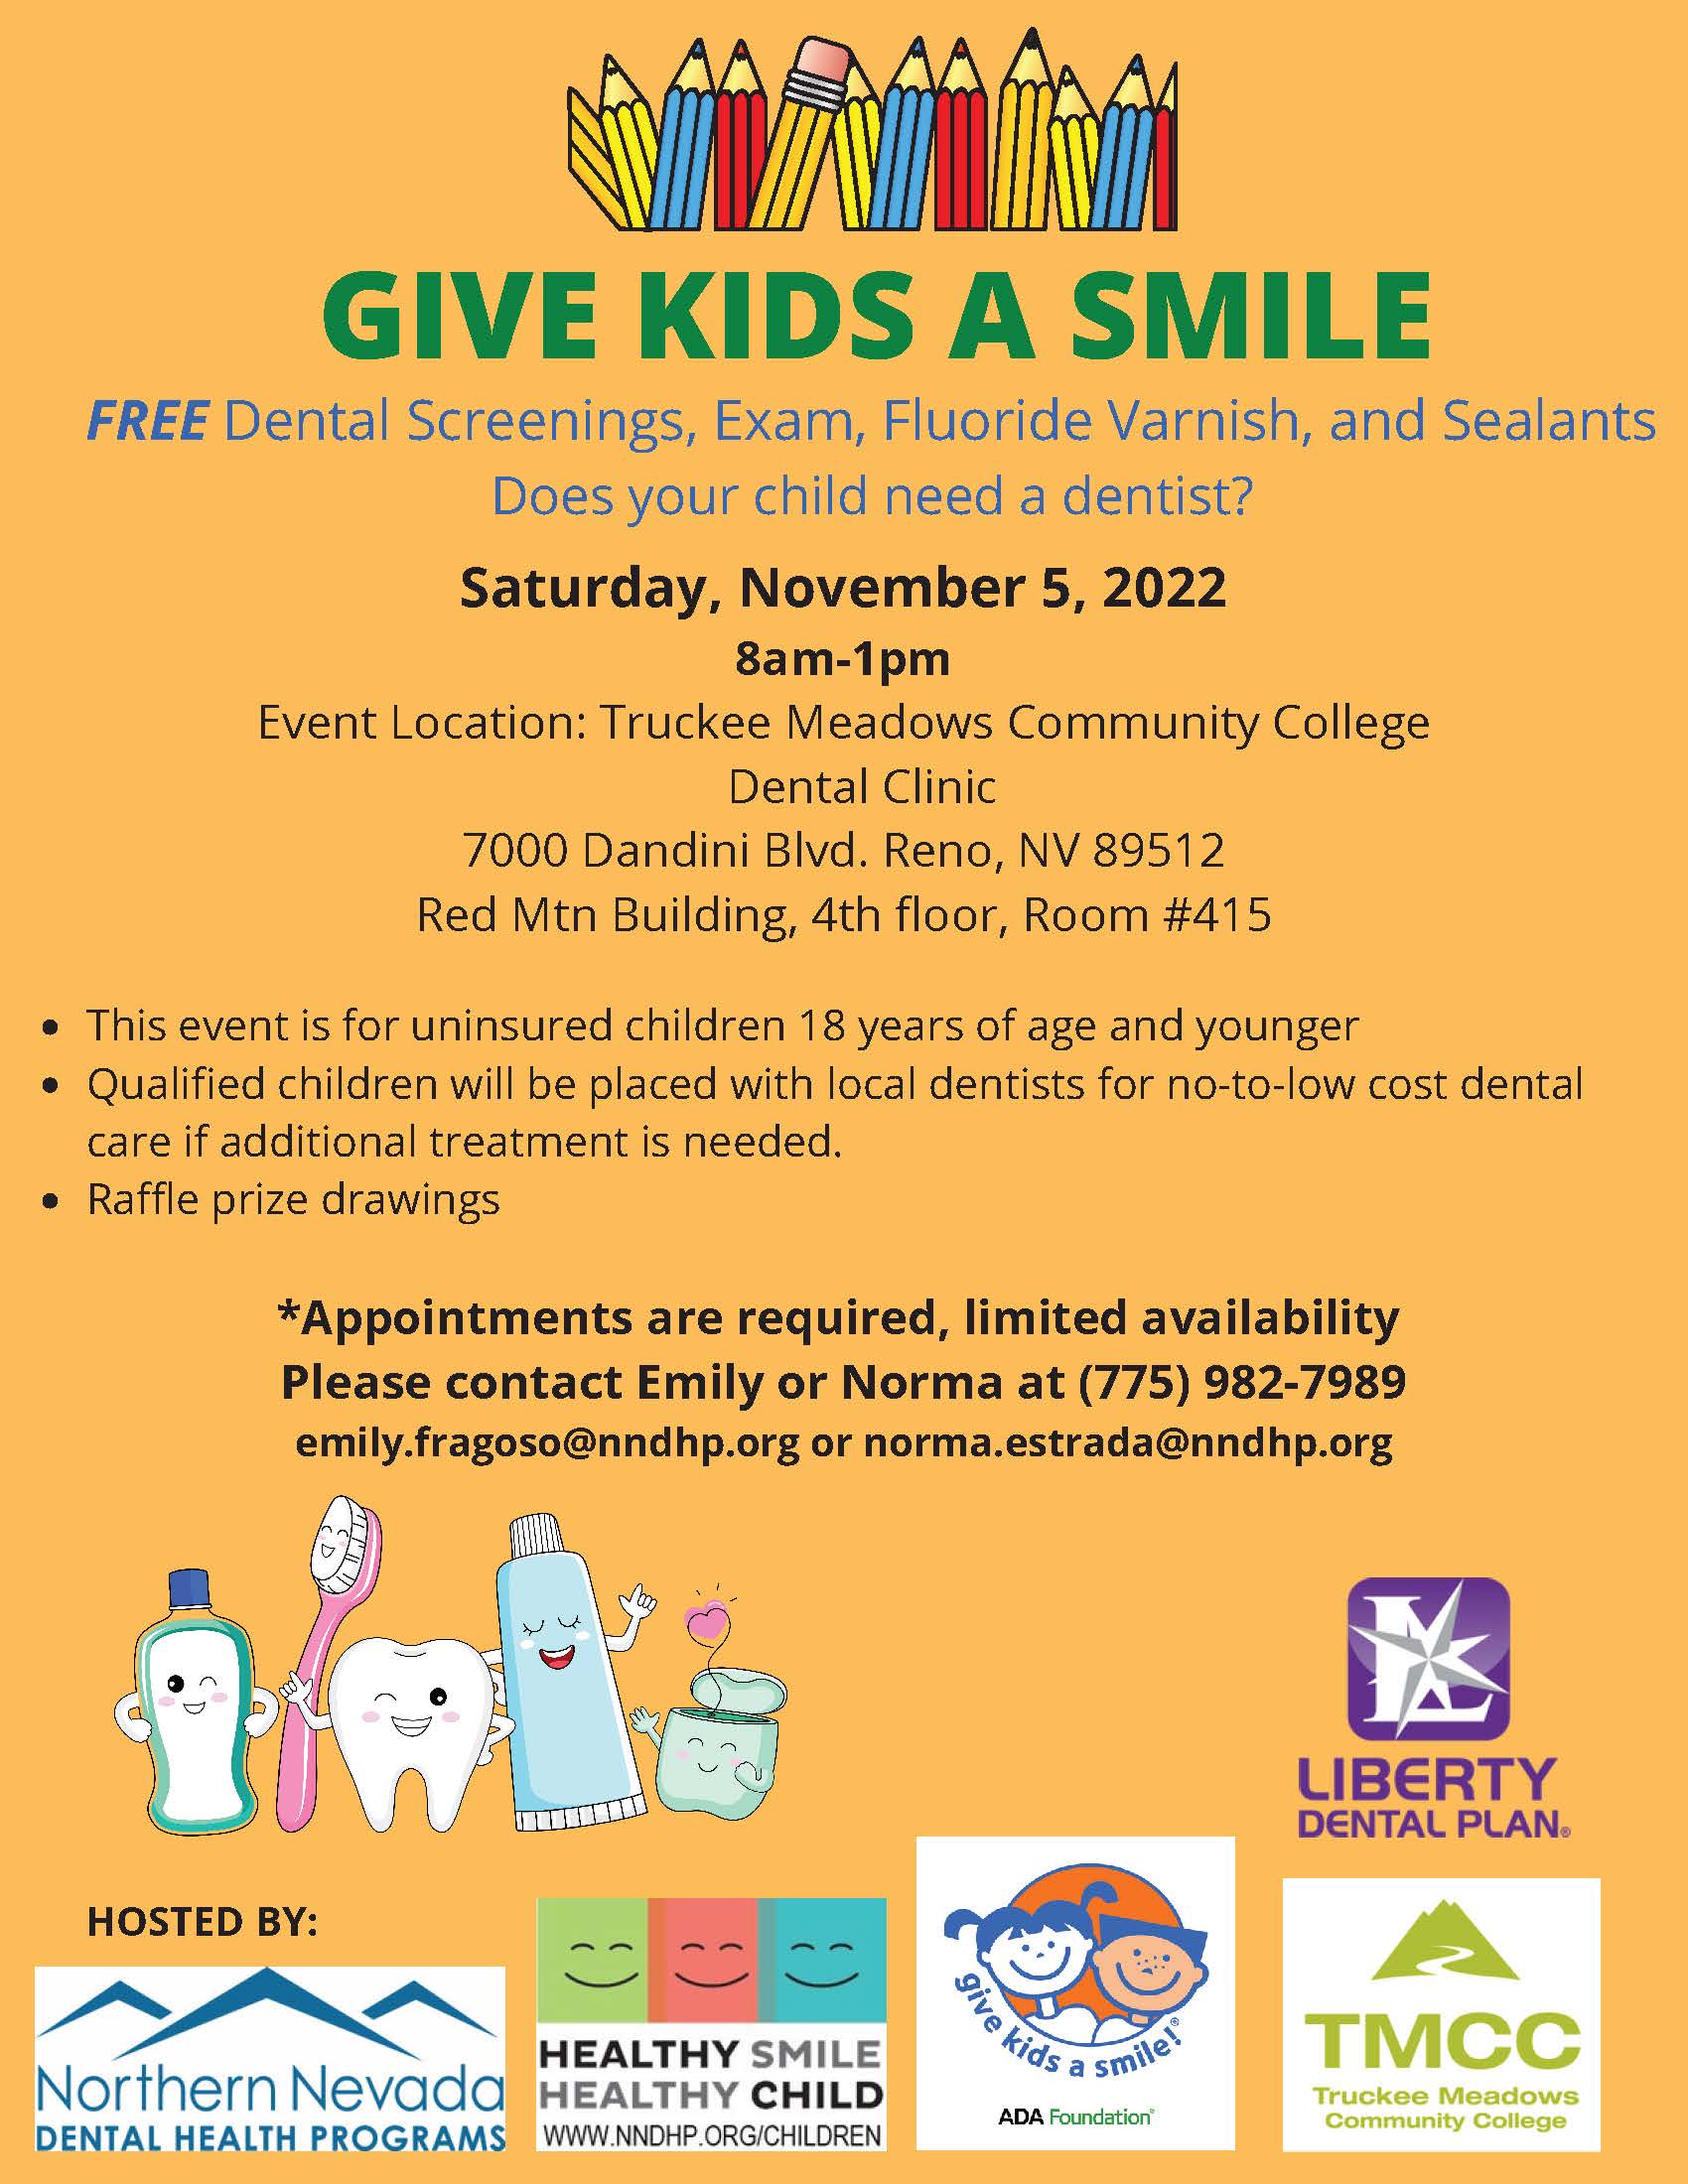 FREE Dental Screenings, Exam, Fluoride Varnish, and Sealants Does your child need a dentist?